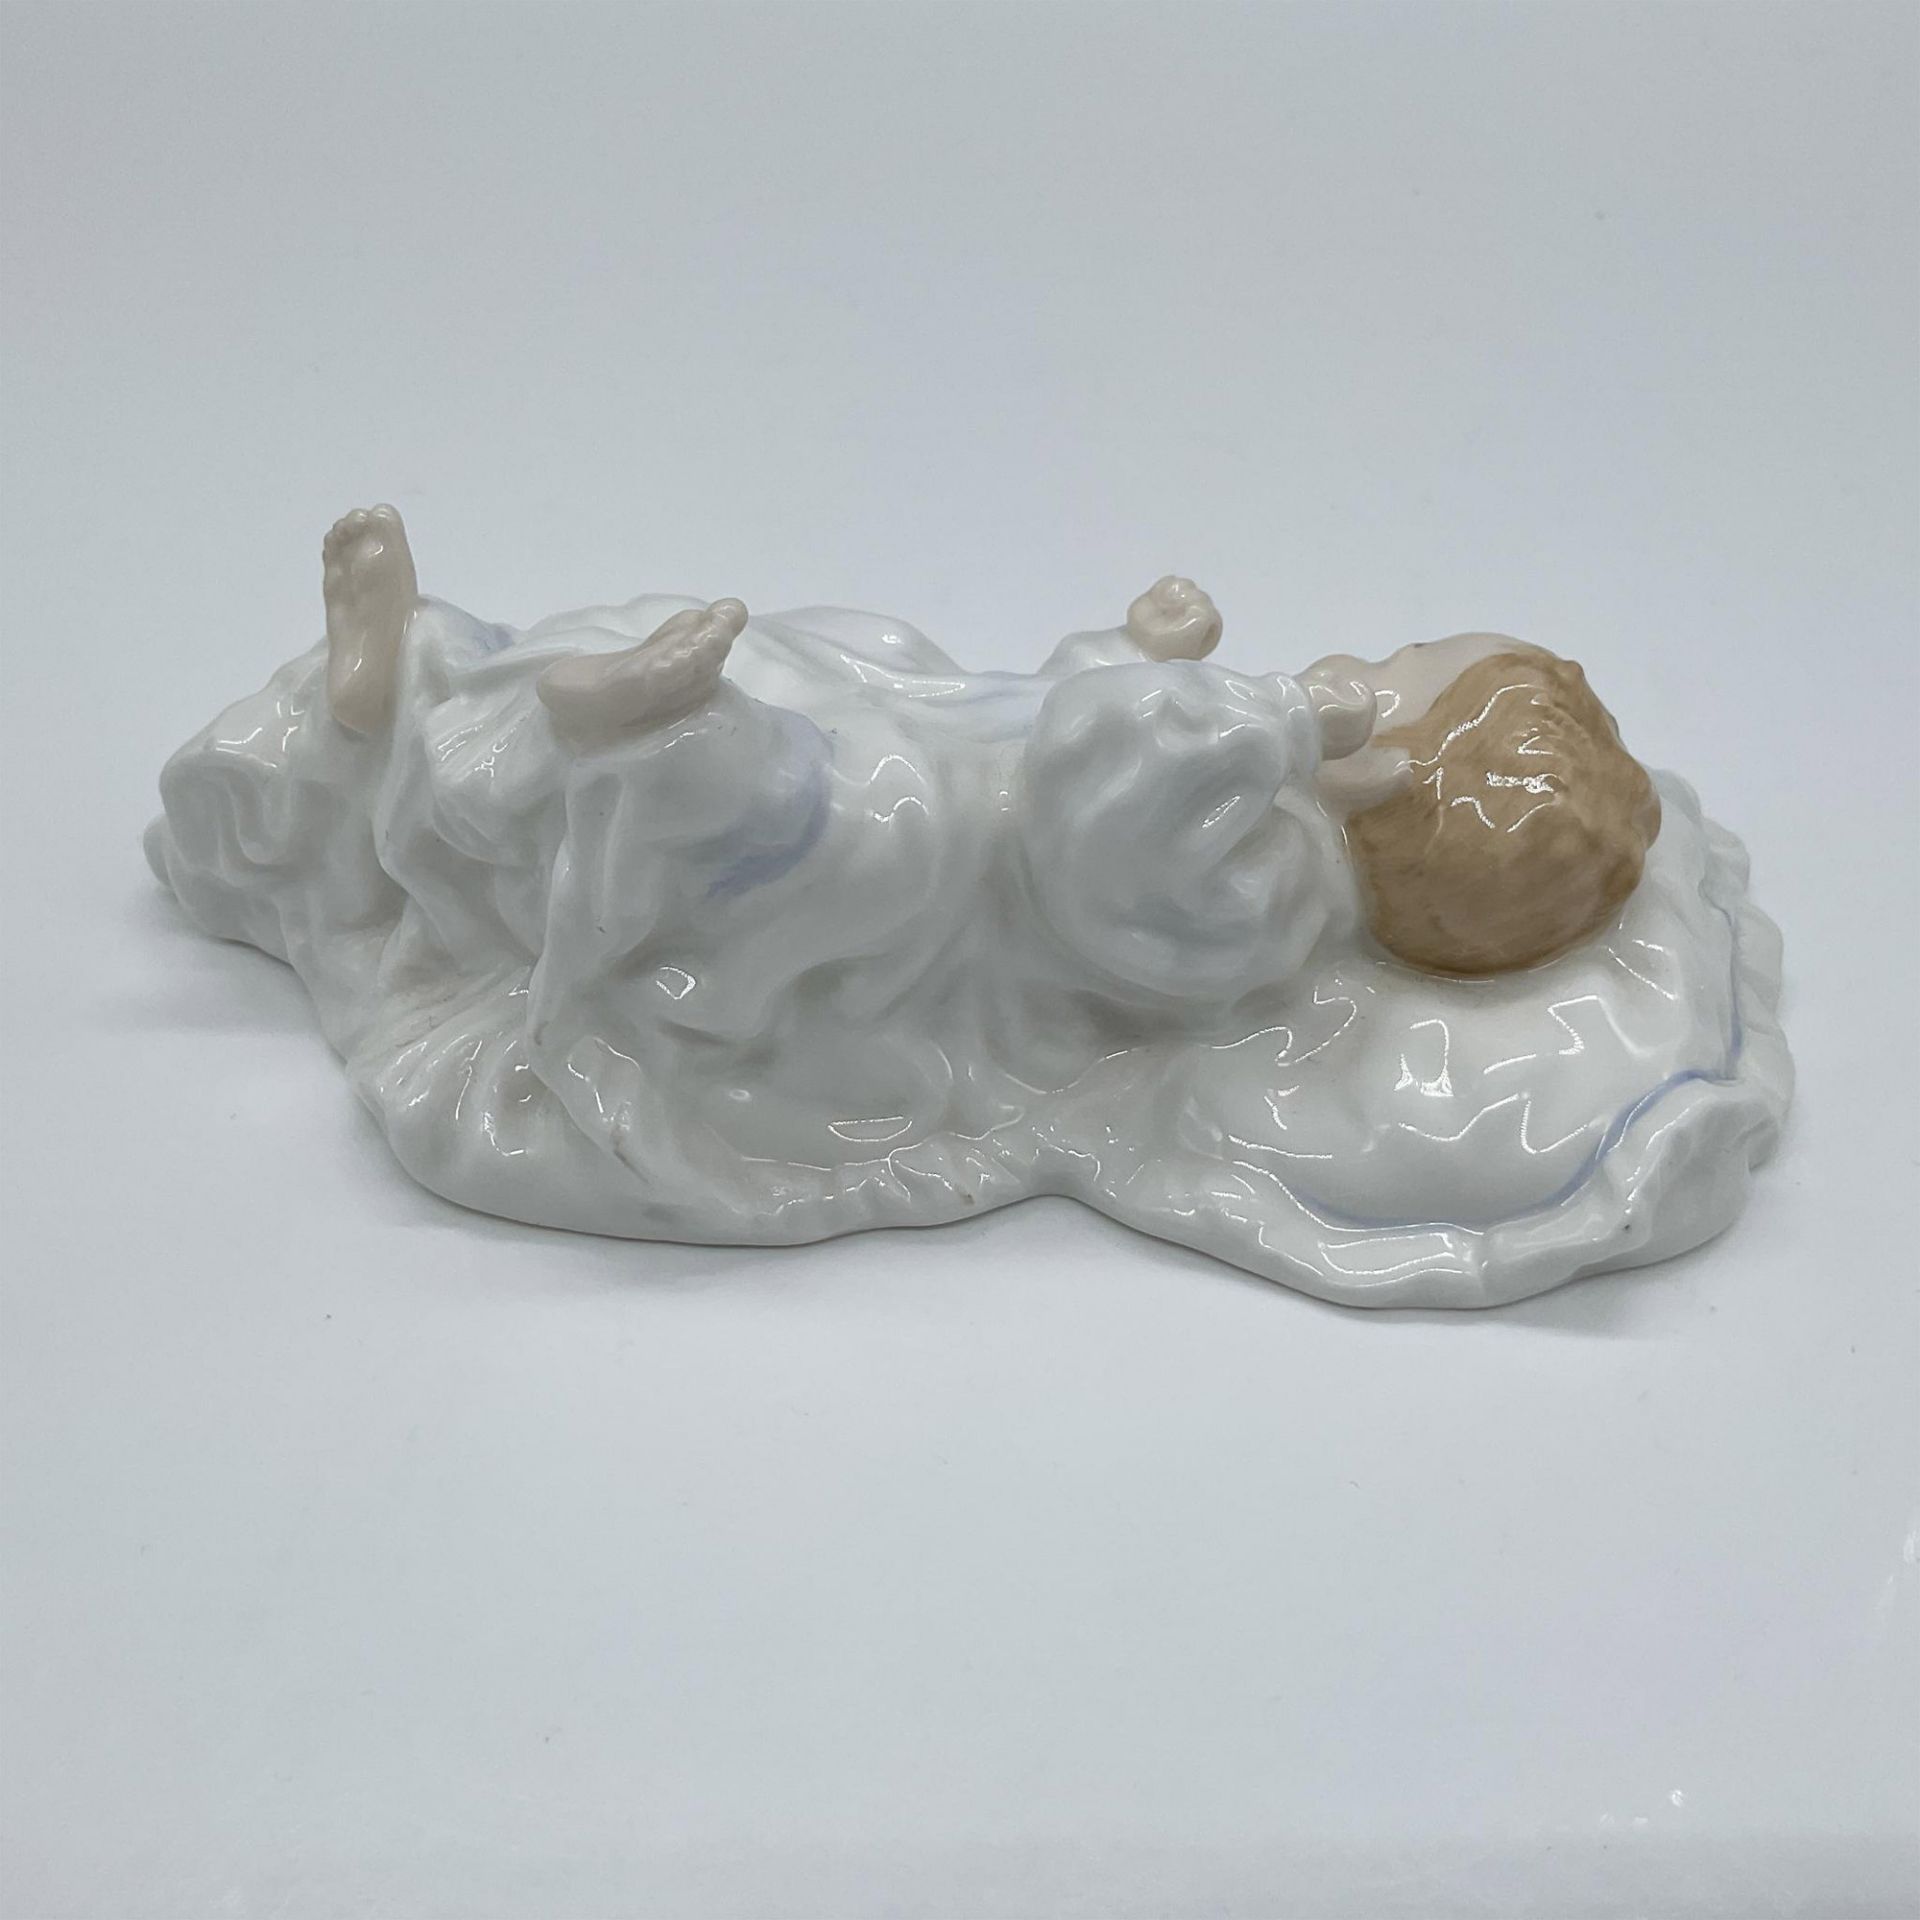 New Baby HN3713 - Royal Doulton Figurine - Image 2 of 3